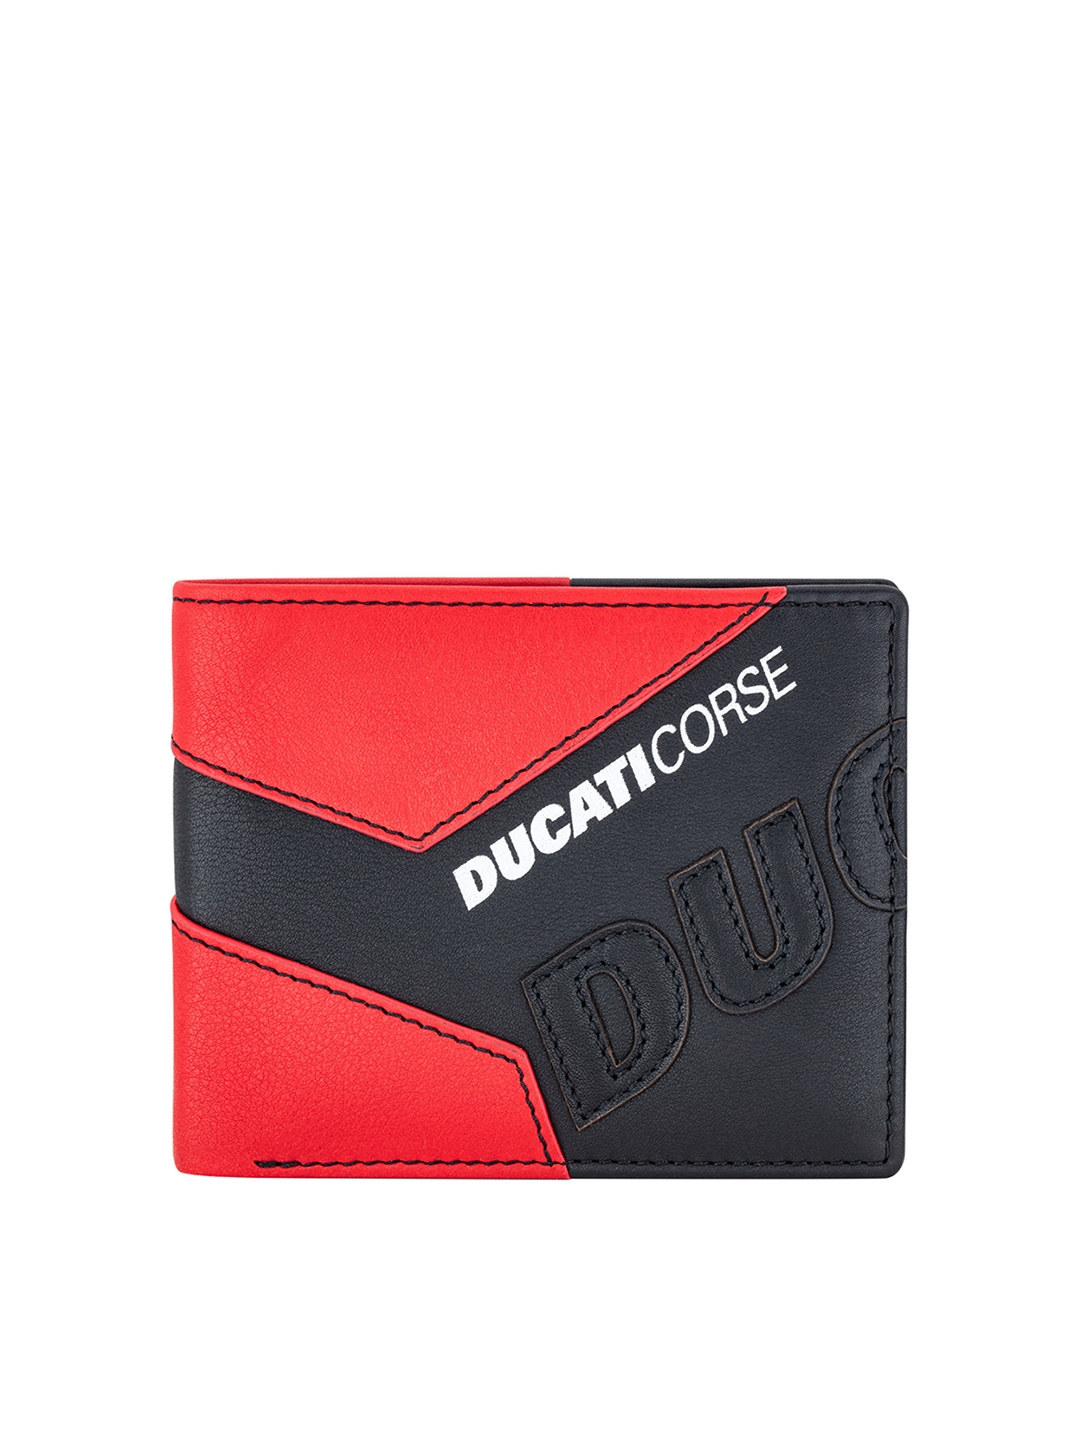 Buy DUCATI CORSE Men Black & Red Printed Cut Work Leather Two Fold ...